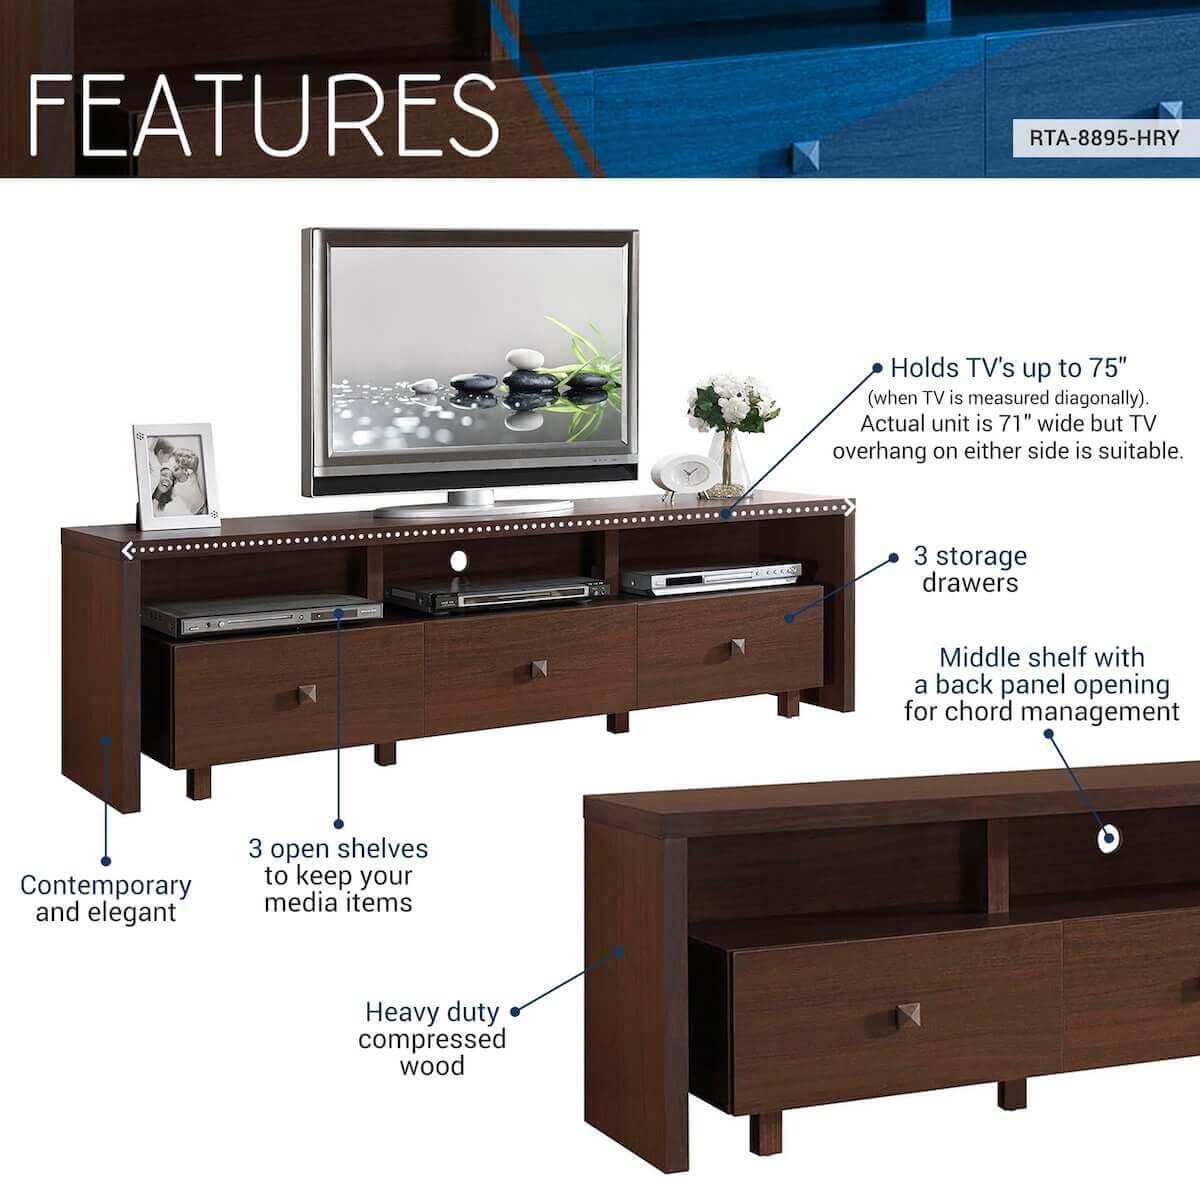 Techni Mobili Hickory Elegant TV Stand for TV's Up To 75" with Storage RTA-8895-HRY Features